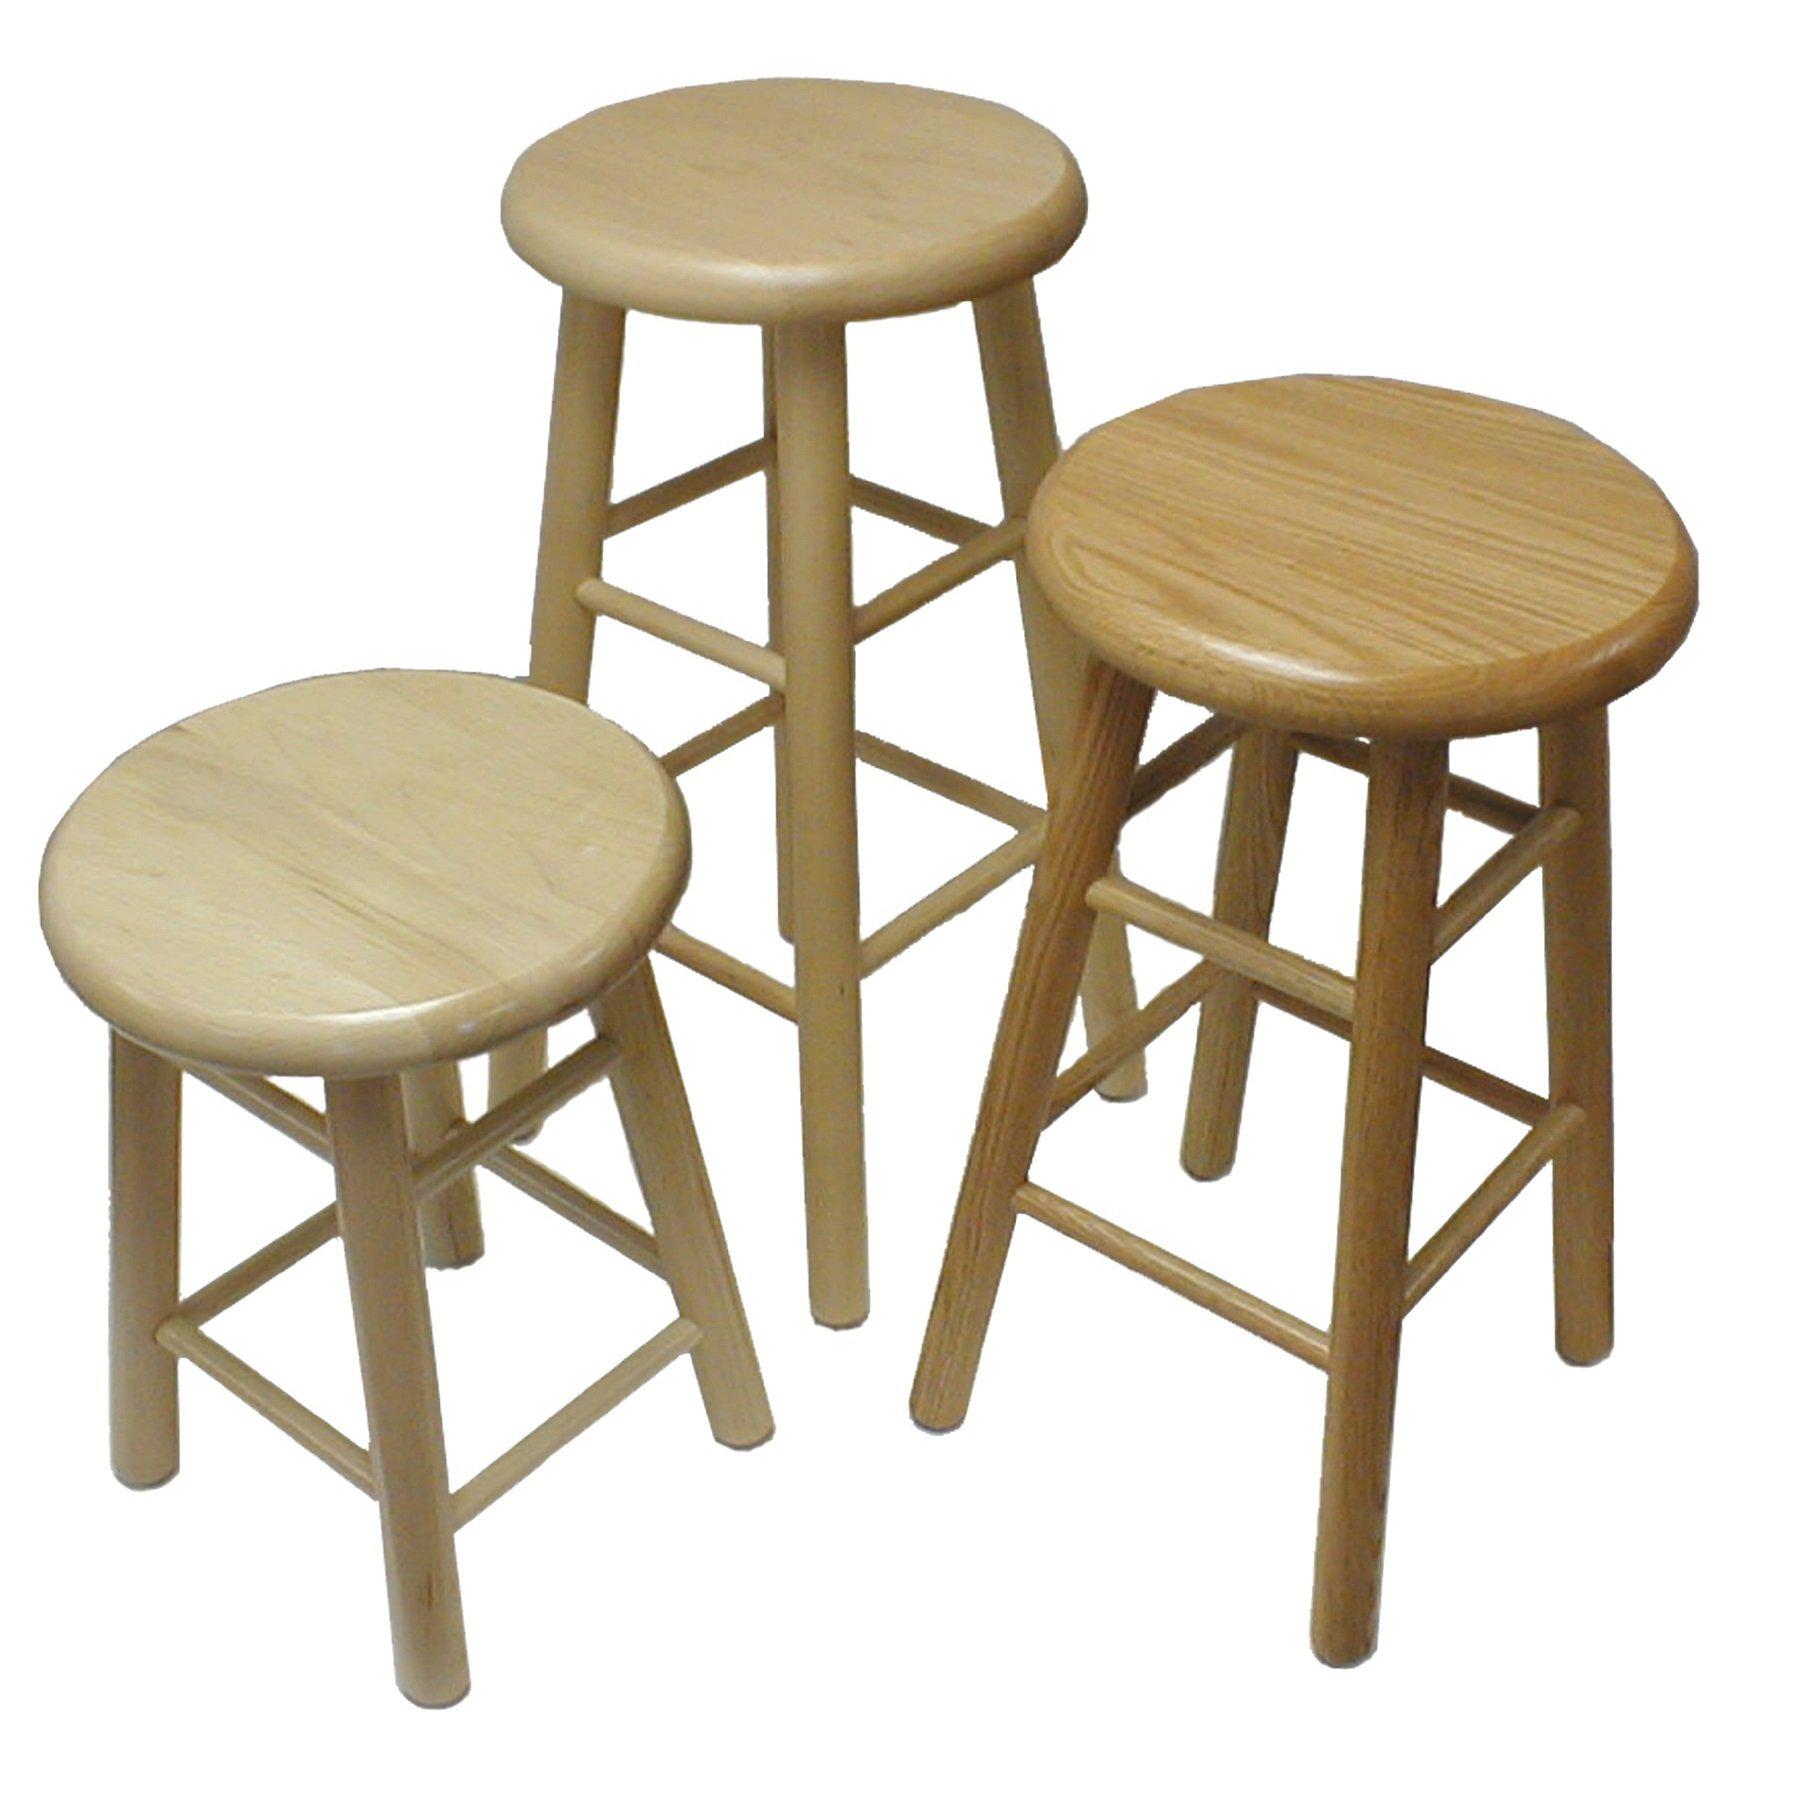 Solid Wood Stool, 24" High